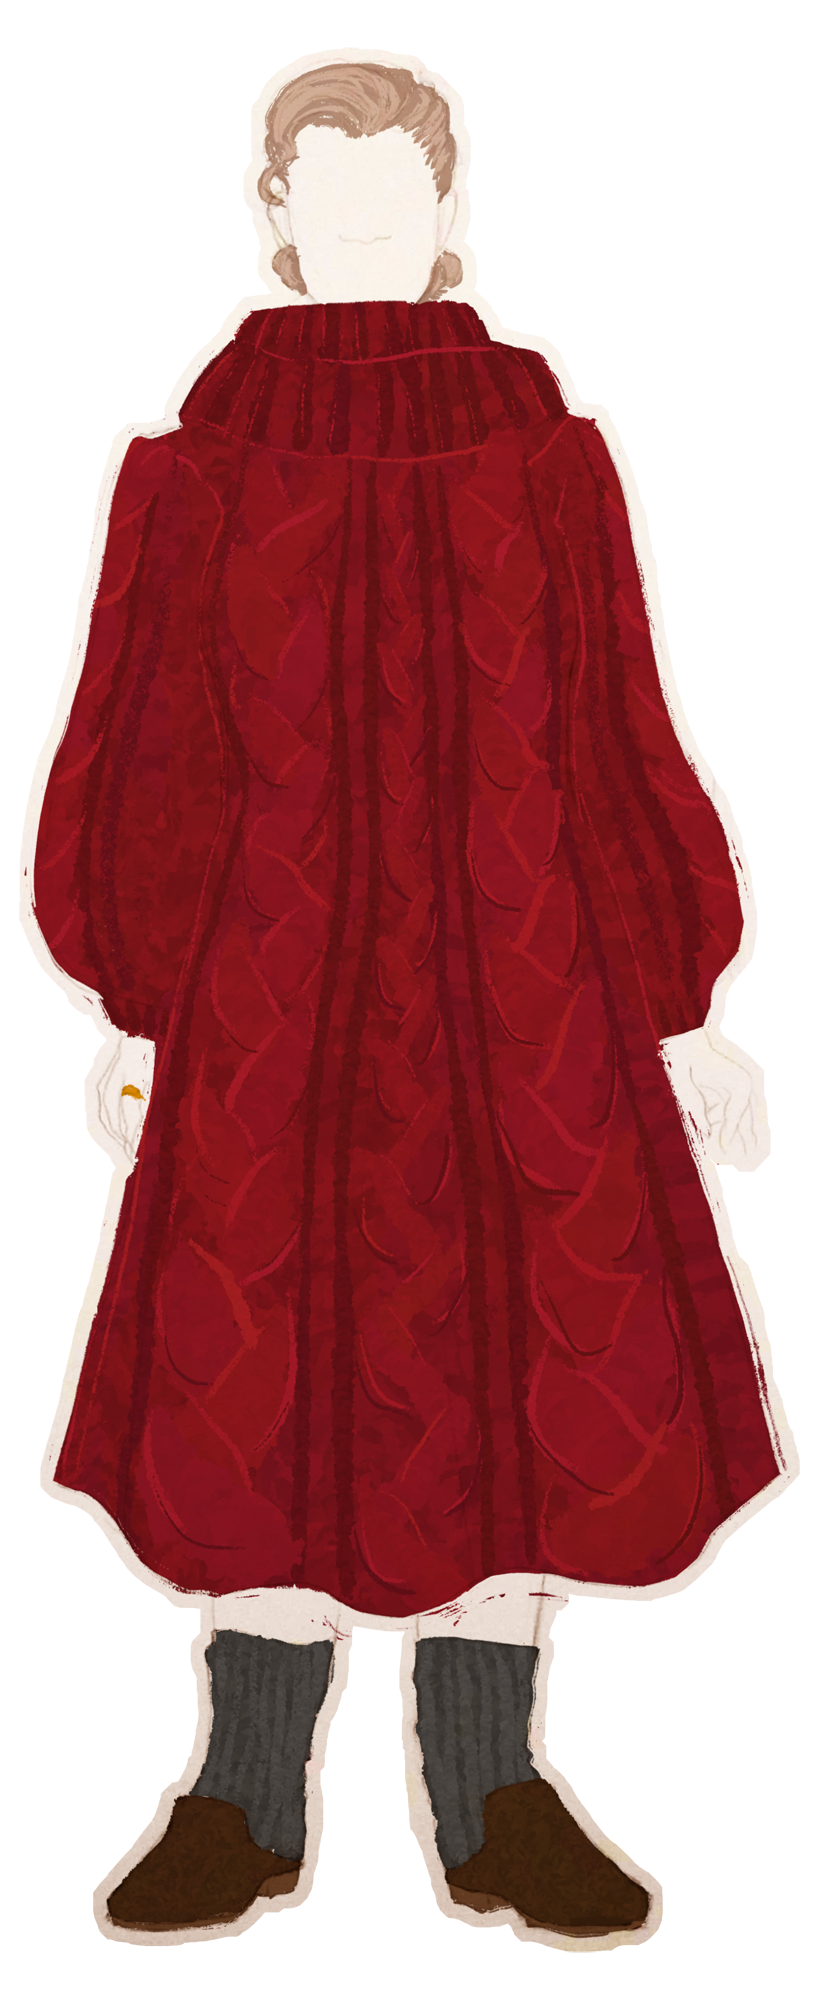 A digital illustration of the character Grandma. She wears a large red knit dress; it has chunky cable knit details and a turtleneck collar, stopping below her calf. She has grey socks in a brown pair of wooden heeled slippers.